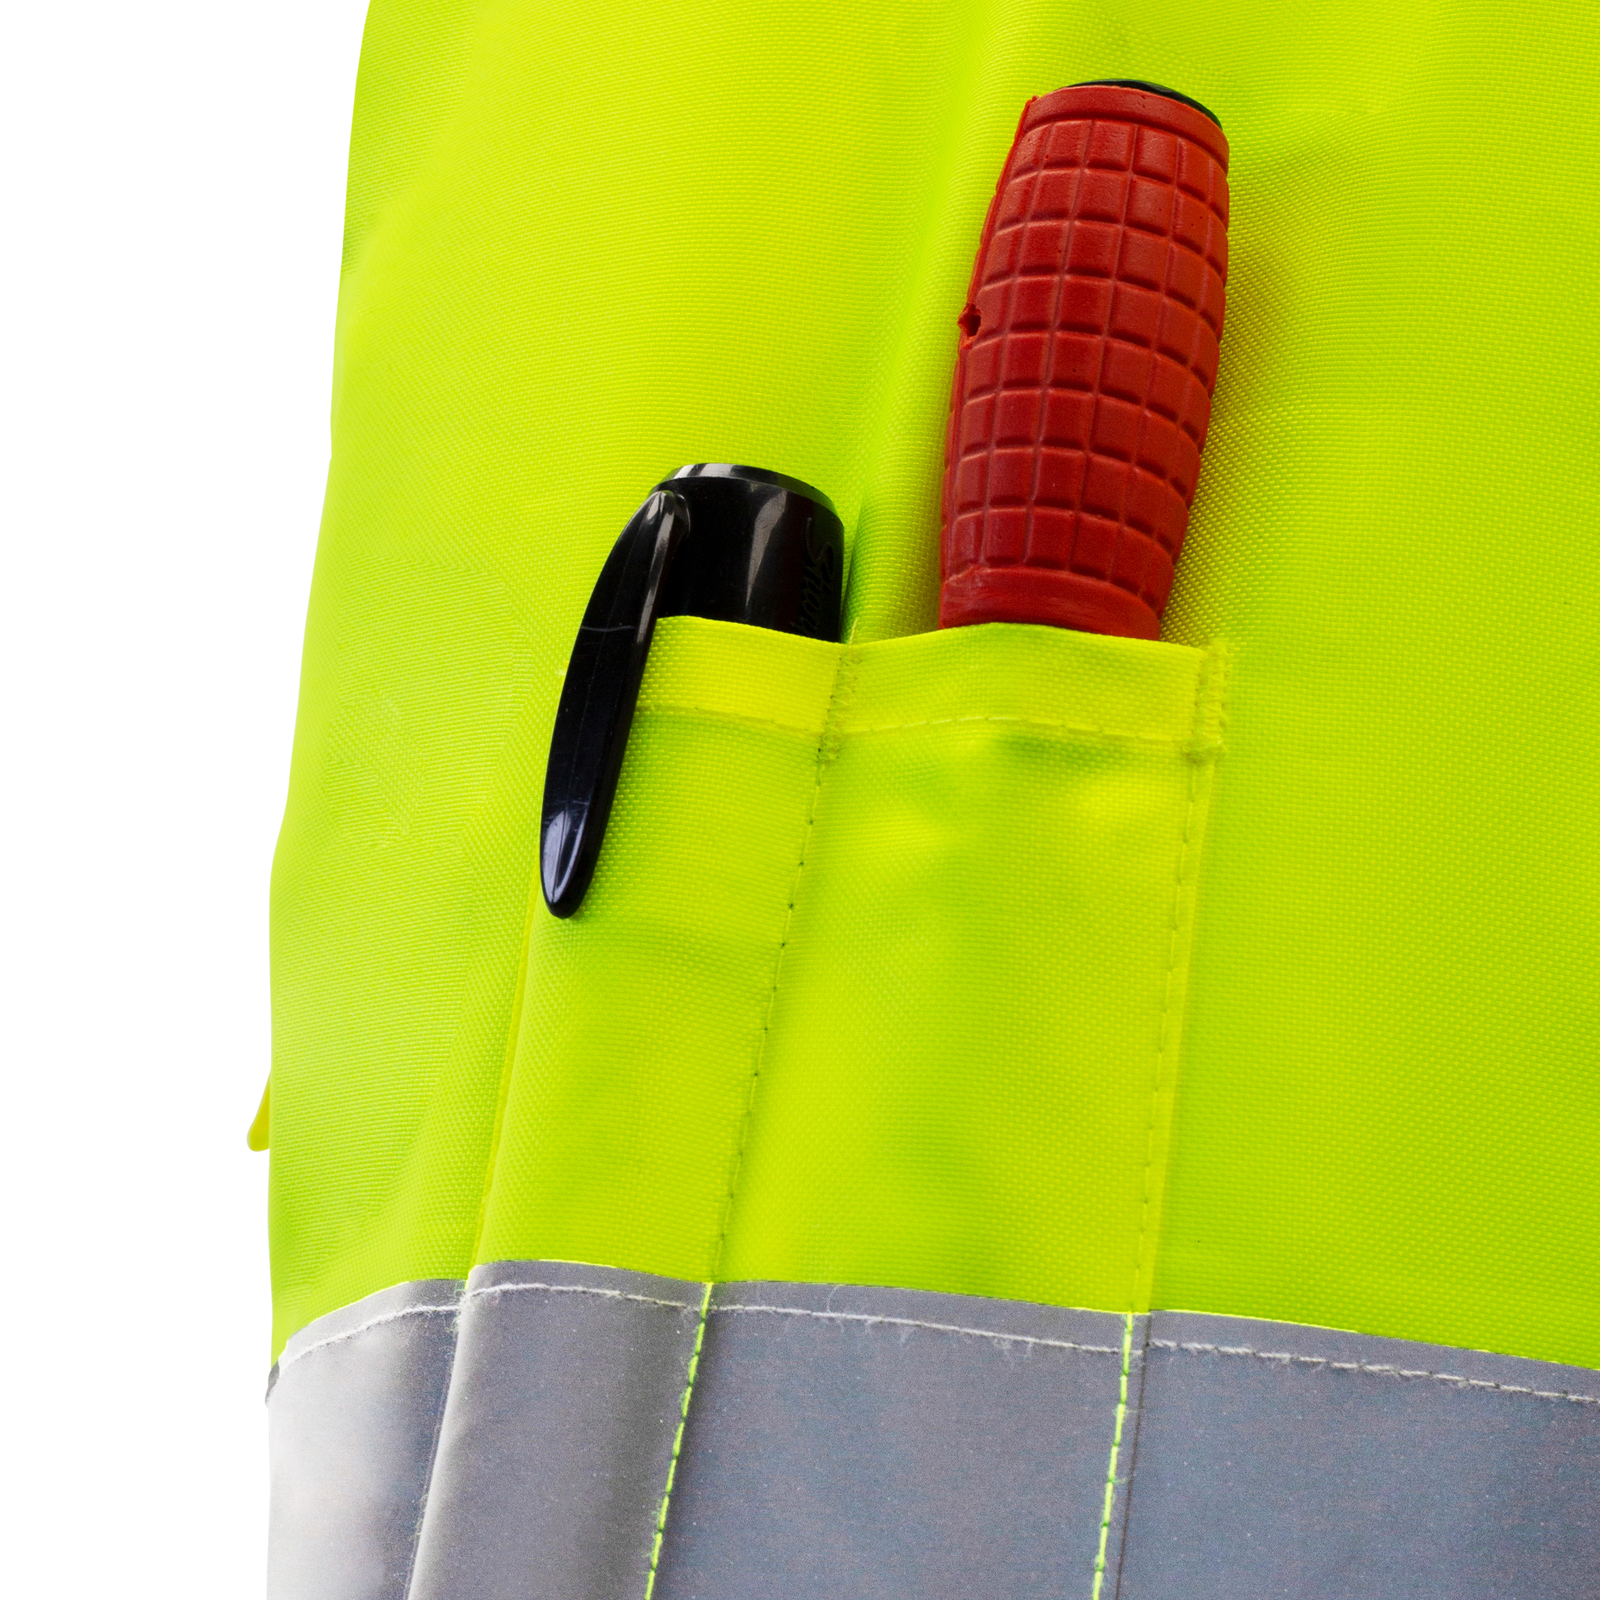 Shows 2 pen  pockets located on one of the sleeves of the JORESTECH Hi visibility reflective jacket with pockets